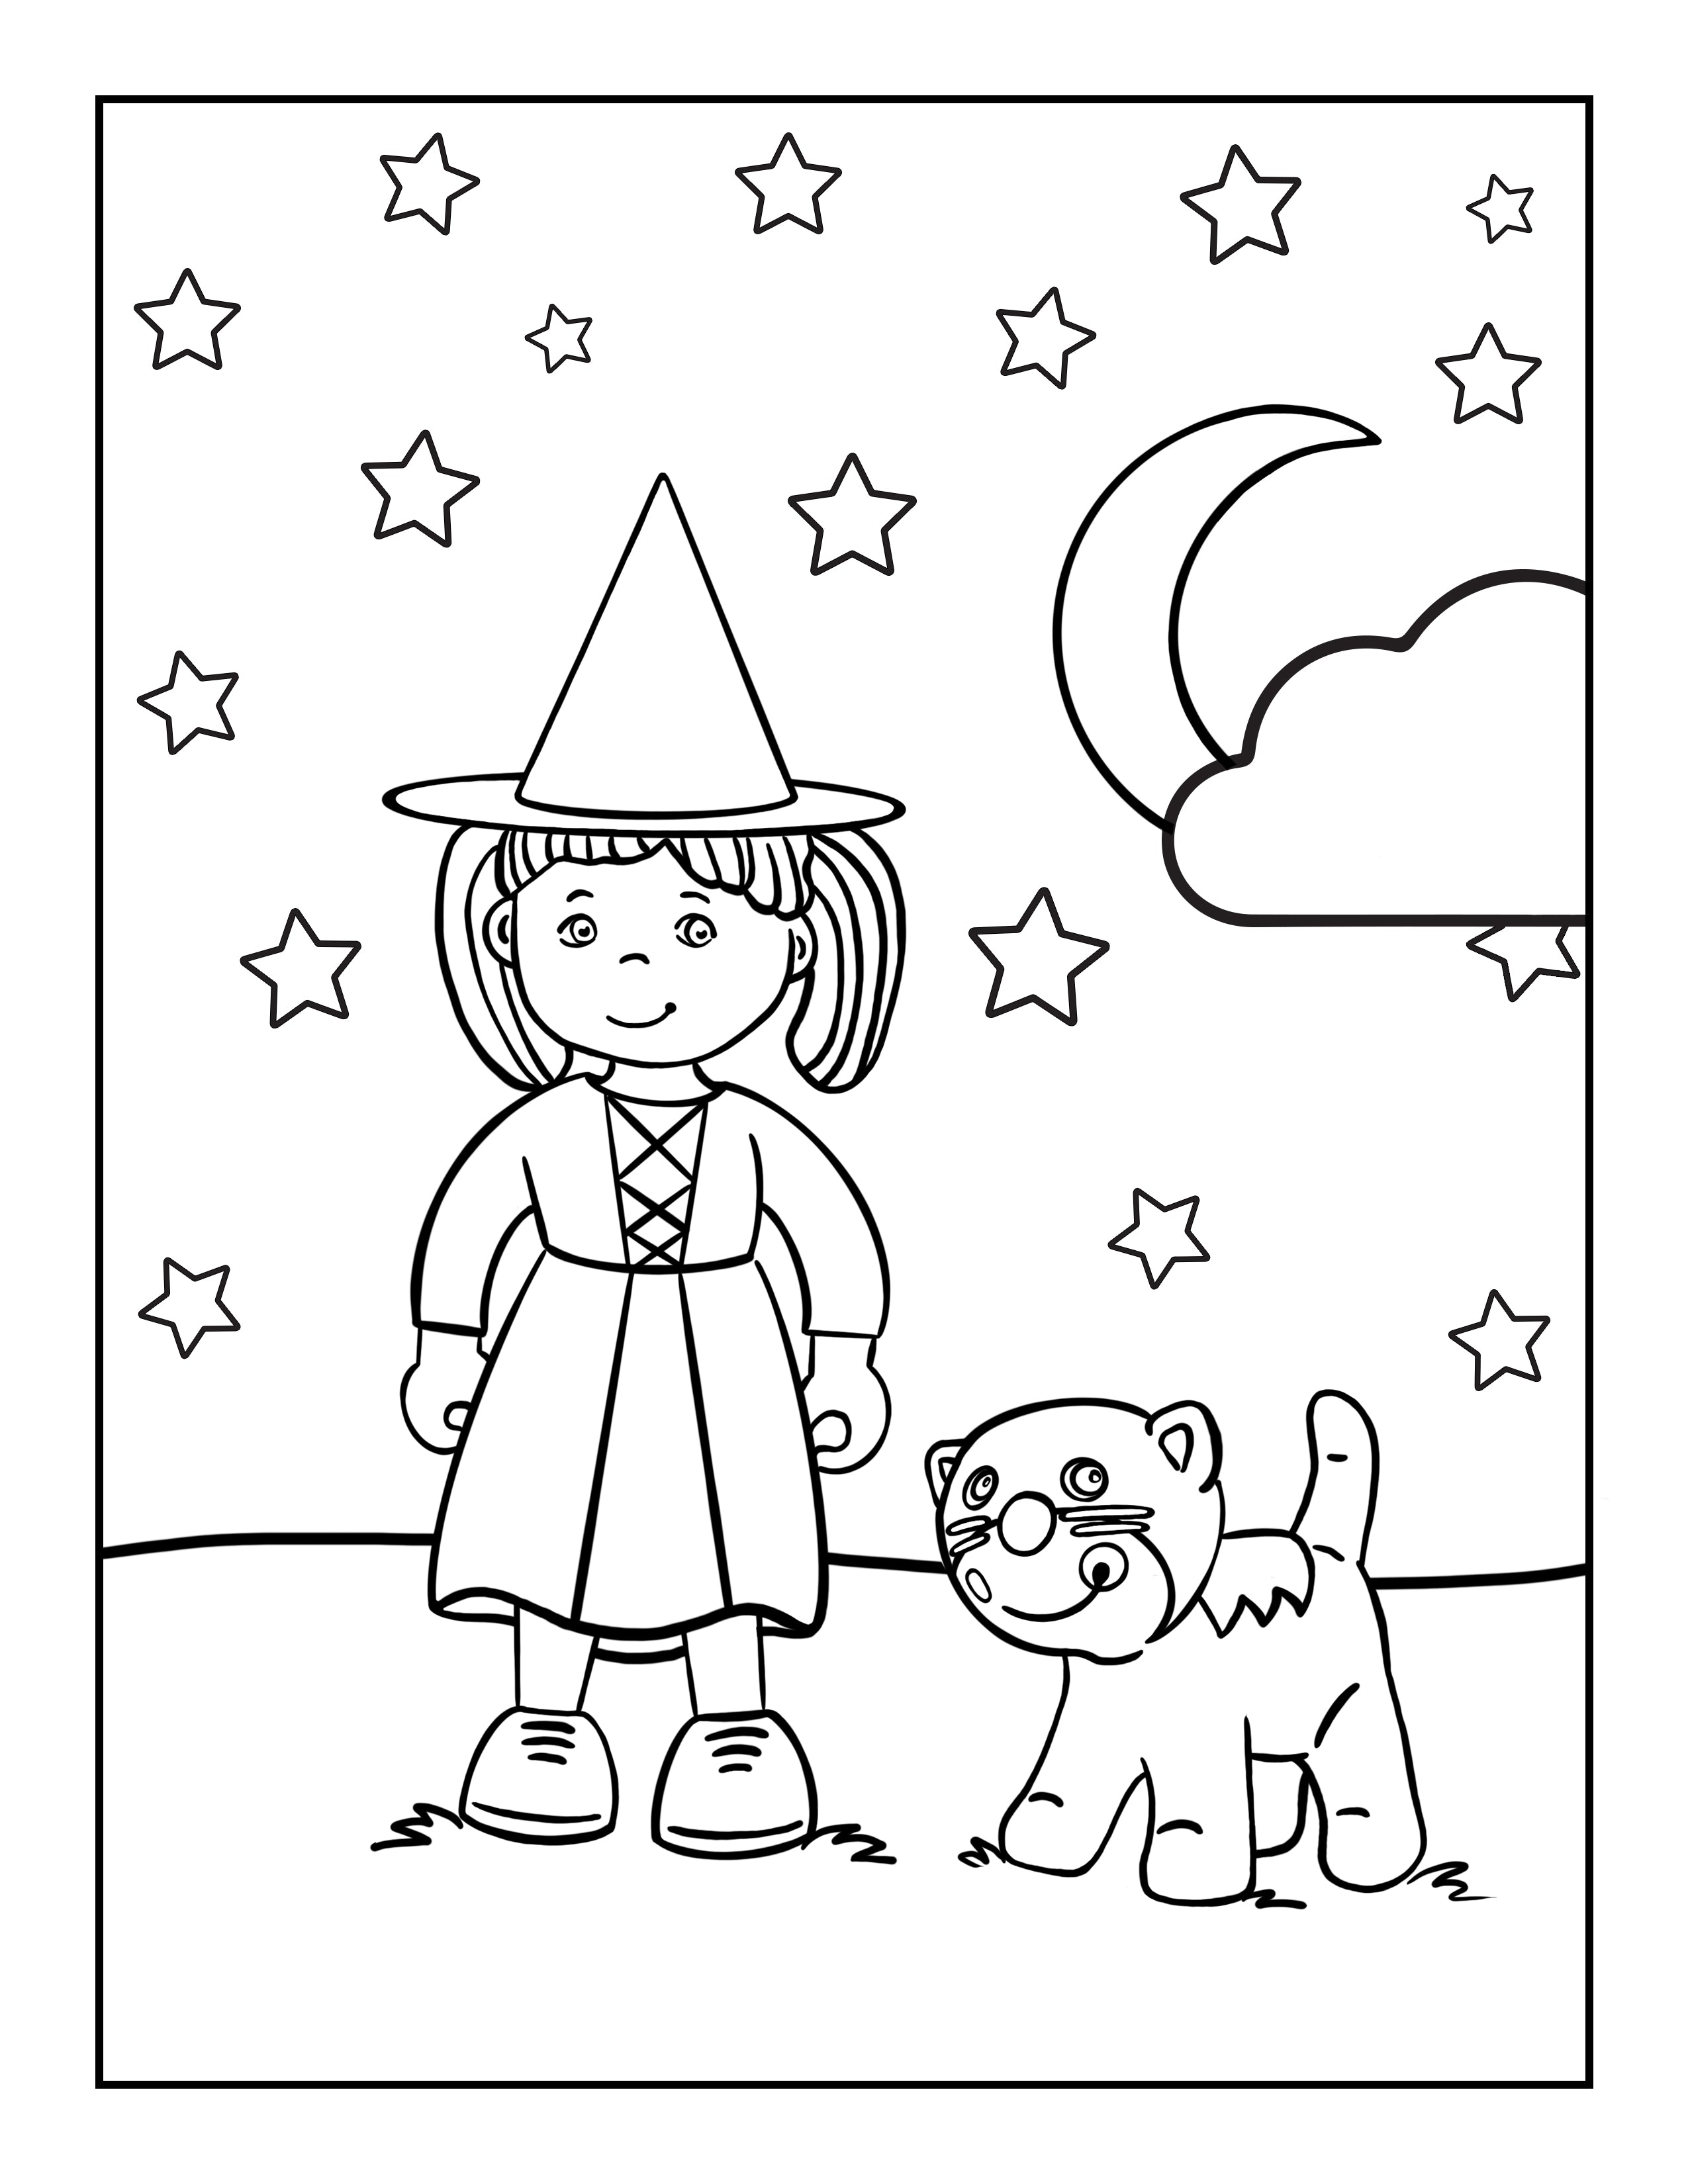 Little Friends witch coloring book page.